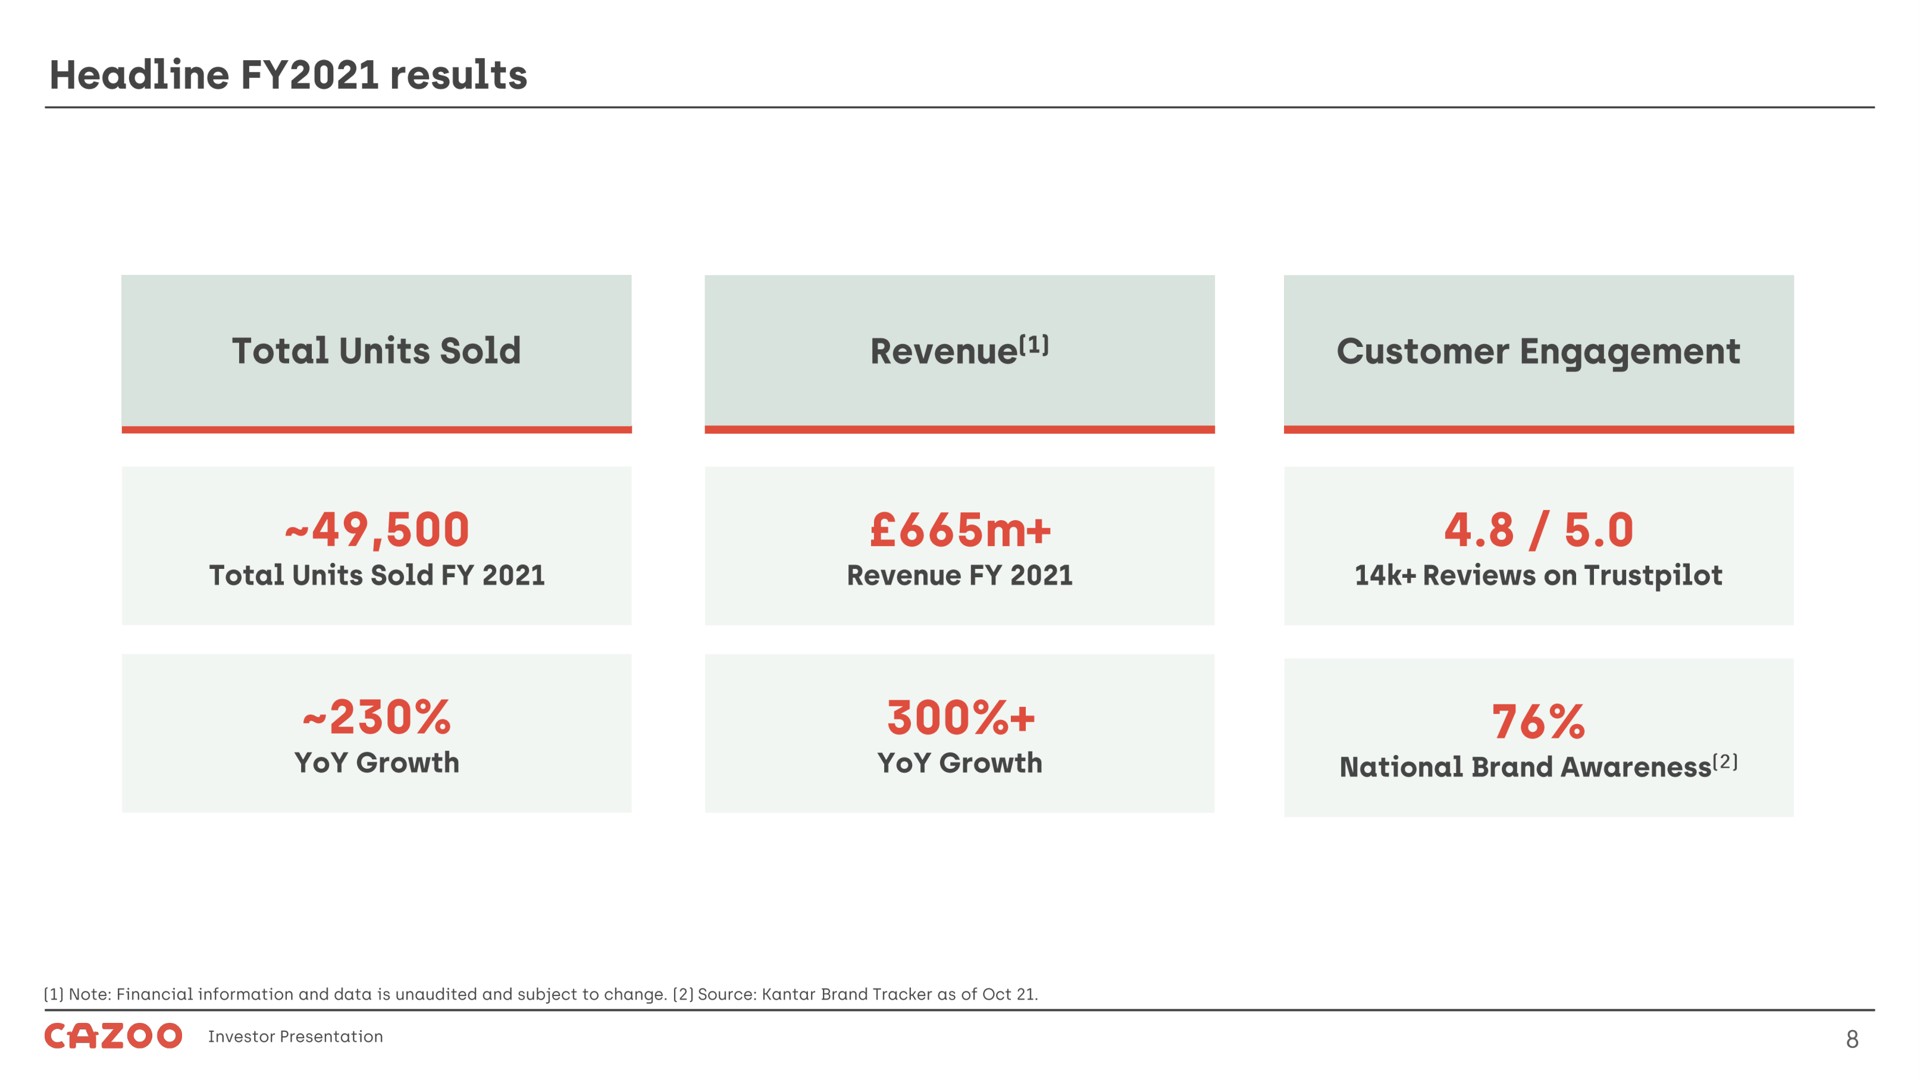 headline results total units sold revenue customer engagement | Cazoo